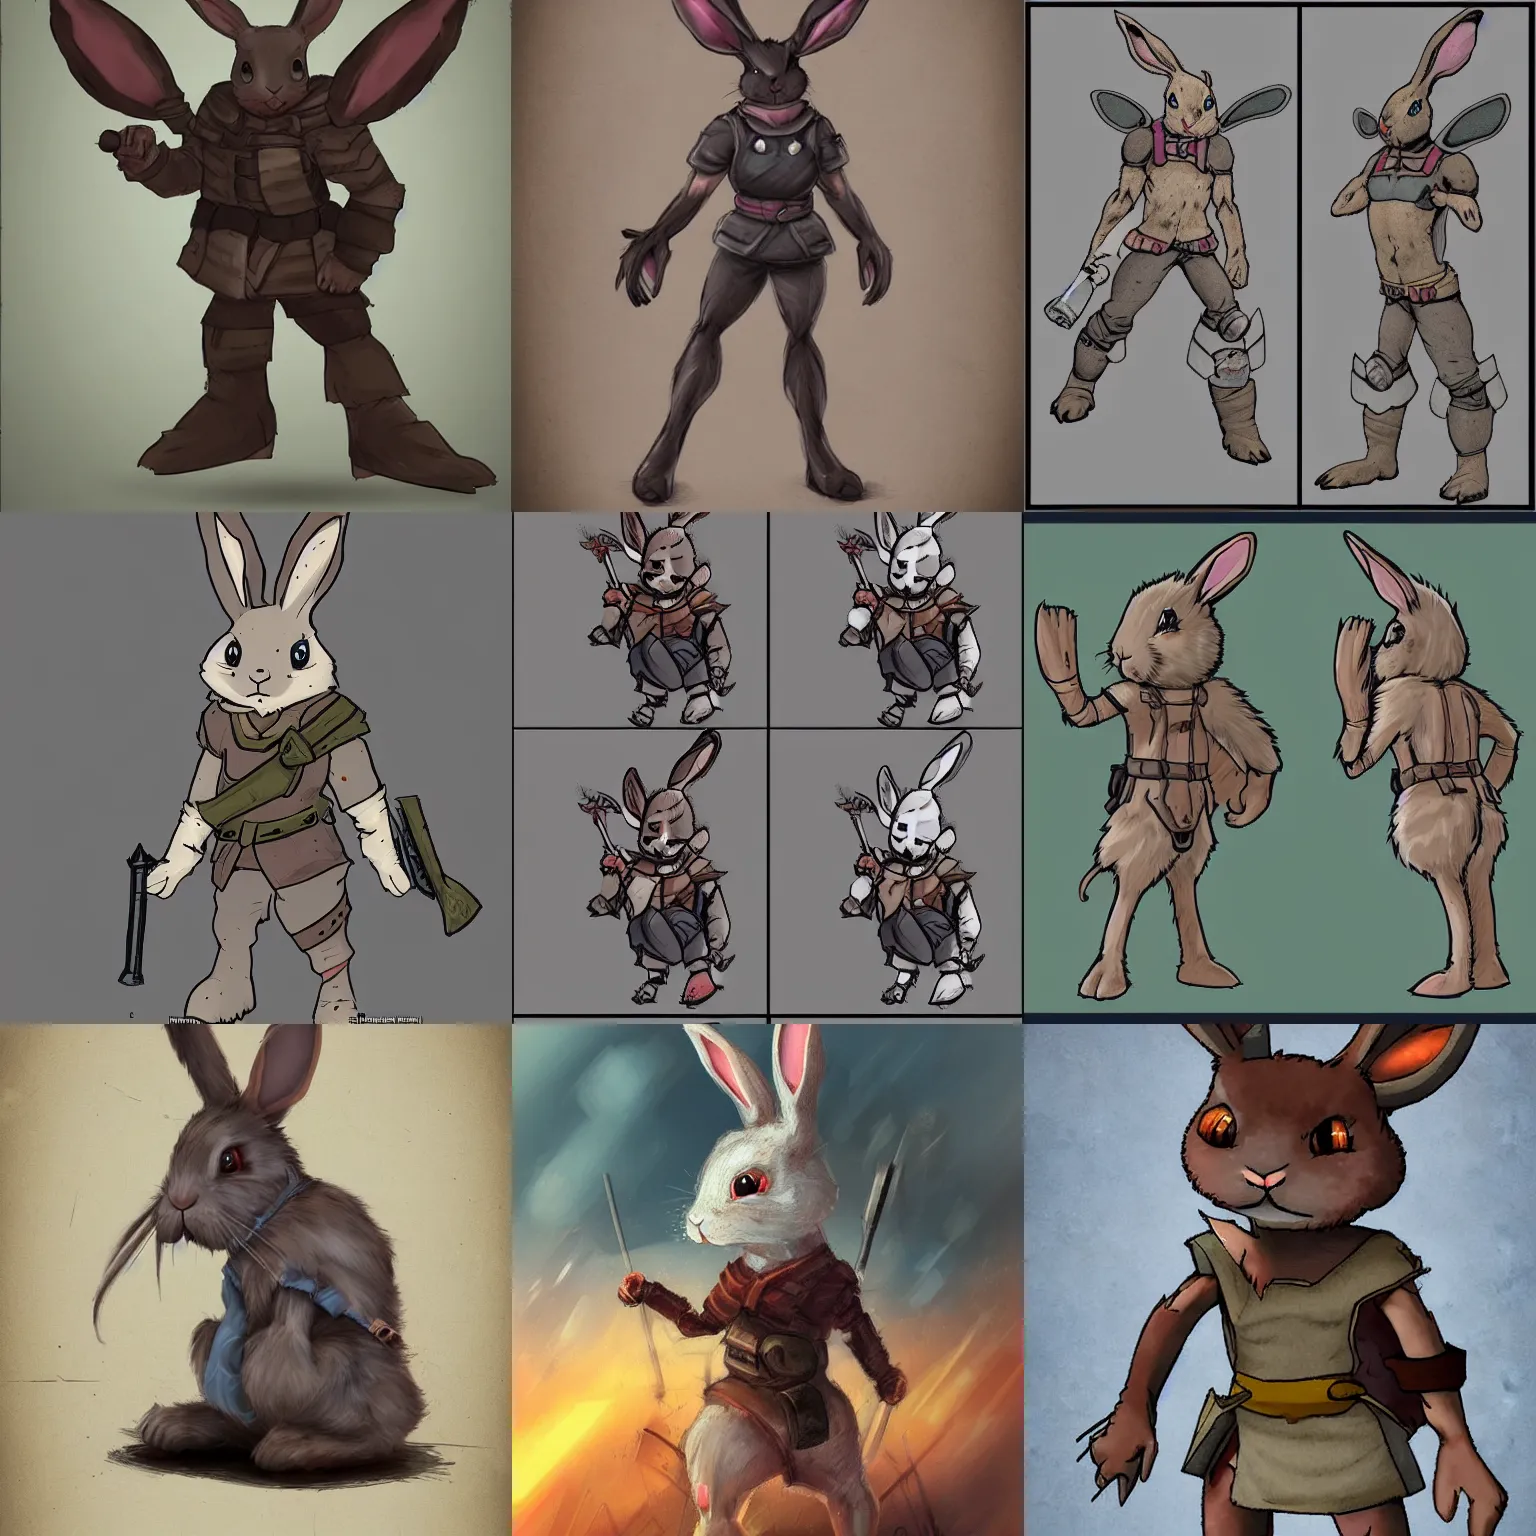 Prompt: character concept - a battle-damaged rabbit as a hero - realistic style.